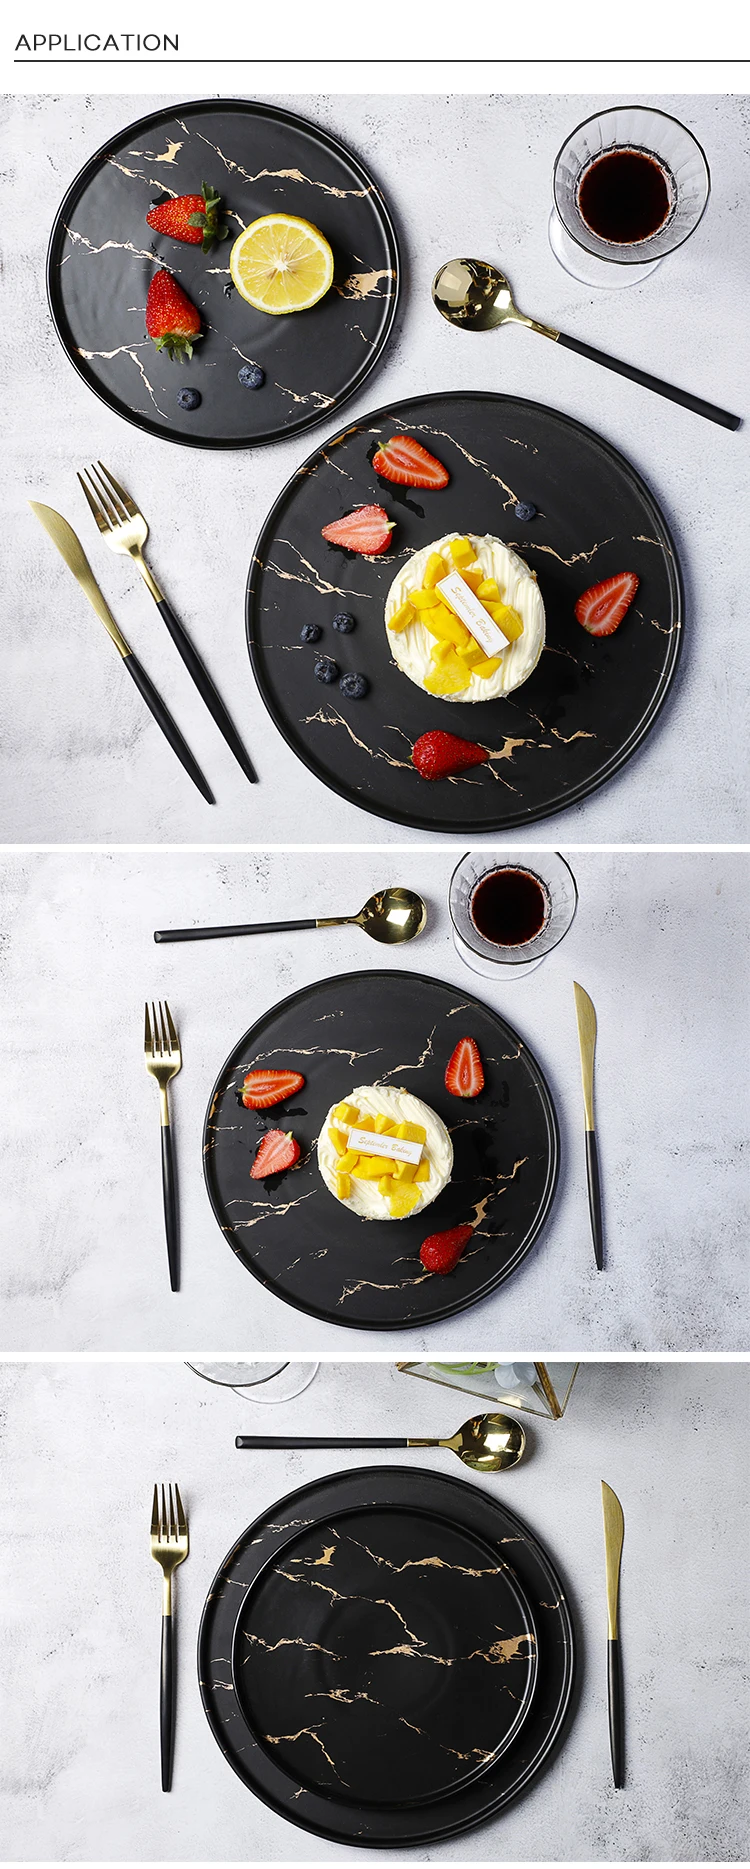 Luxury Hotel Use Black &Gold Decal Porcelain Marble, New Arrivals Two Eight 8.5/10.5 Inch Ceramic Marble Plate&